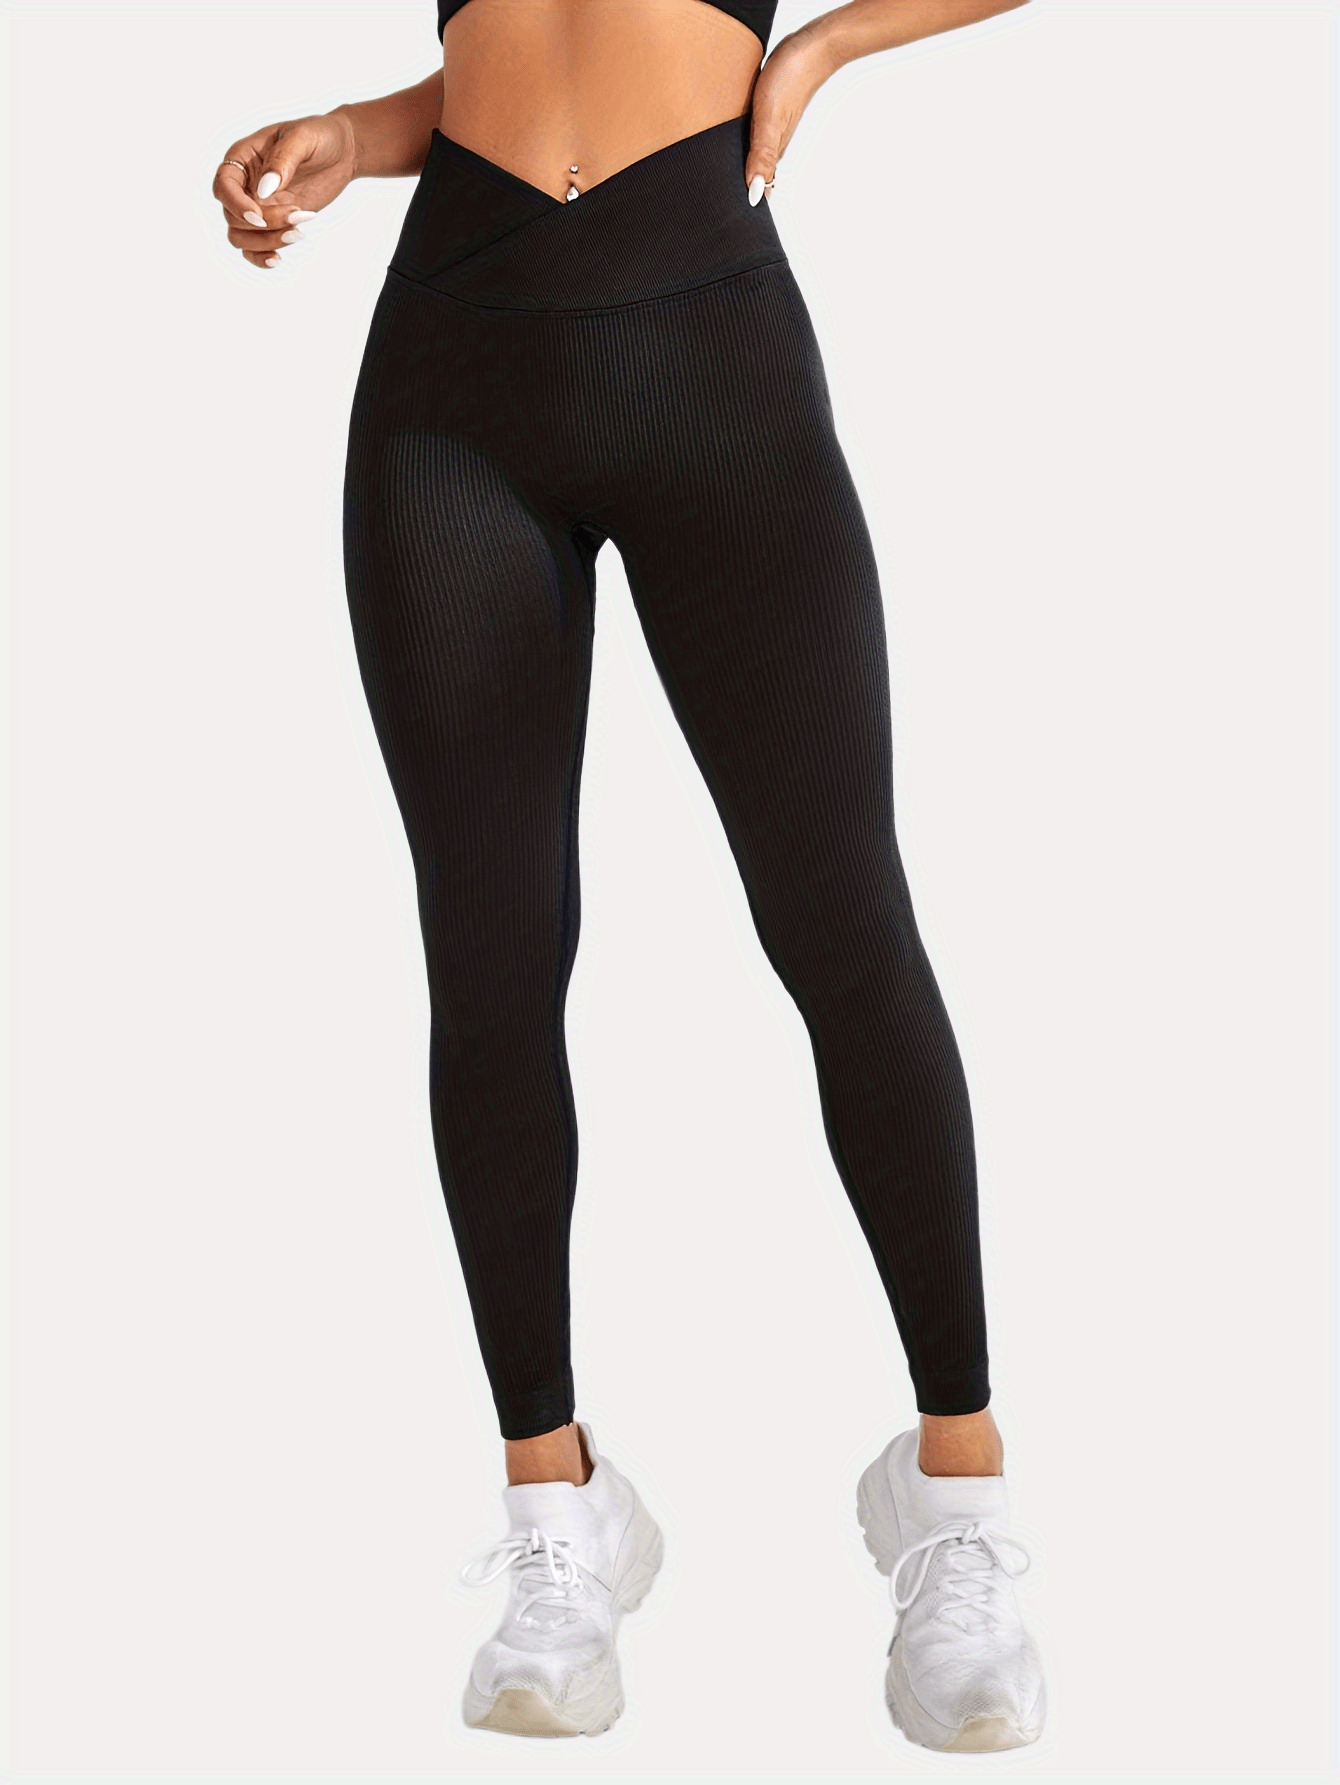 15 Patterned Workout Leggings We Love - Society19  Fitness leggings women,  Workout attire, Workout clothes